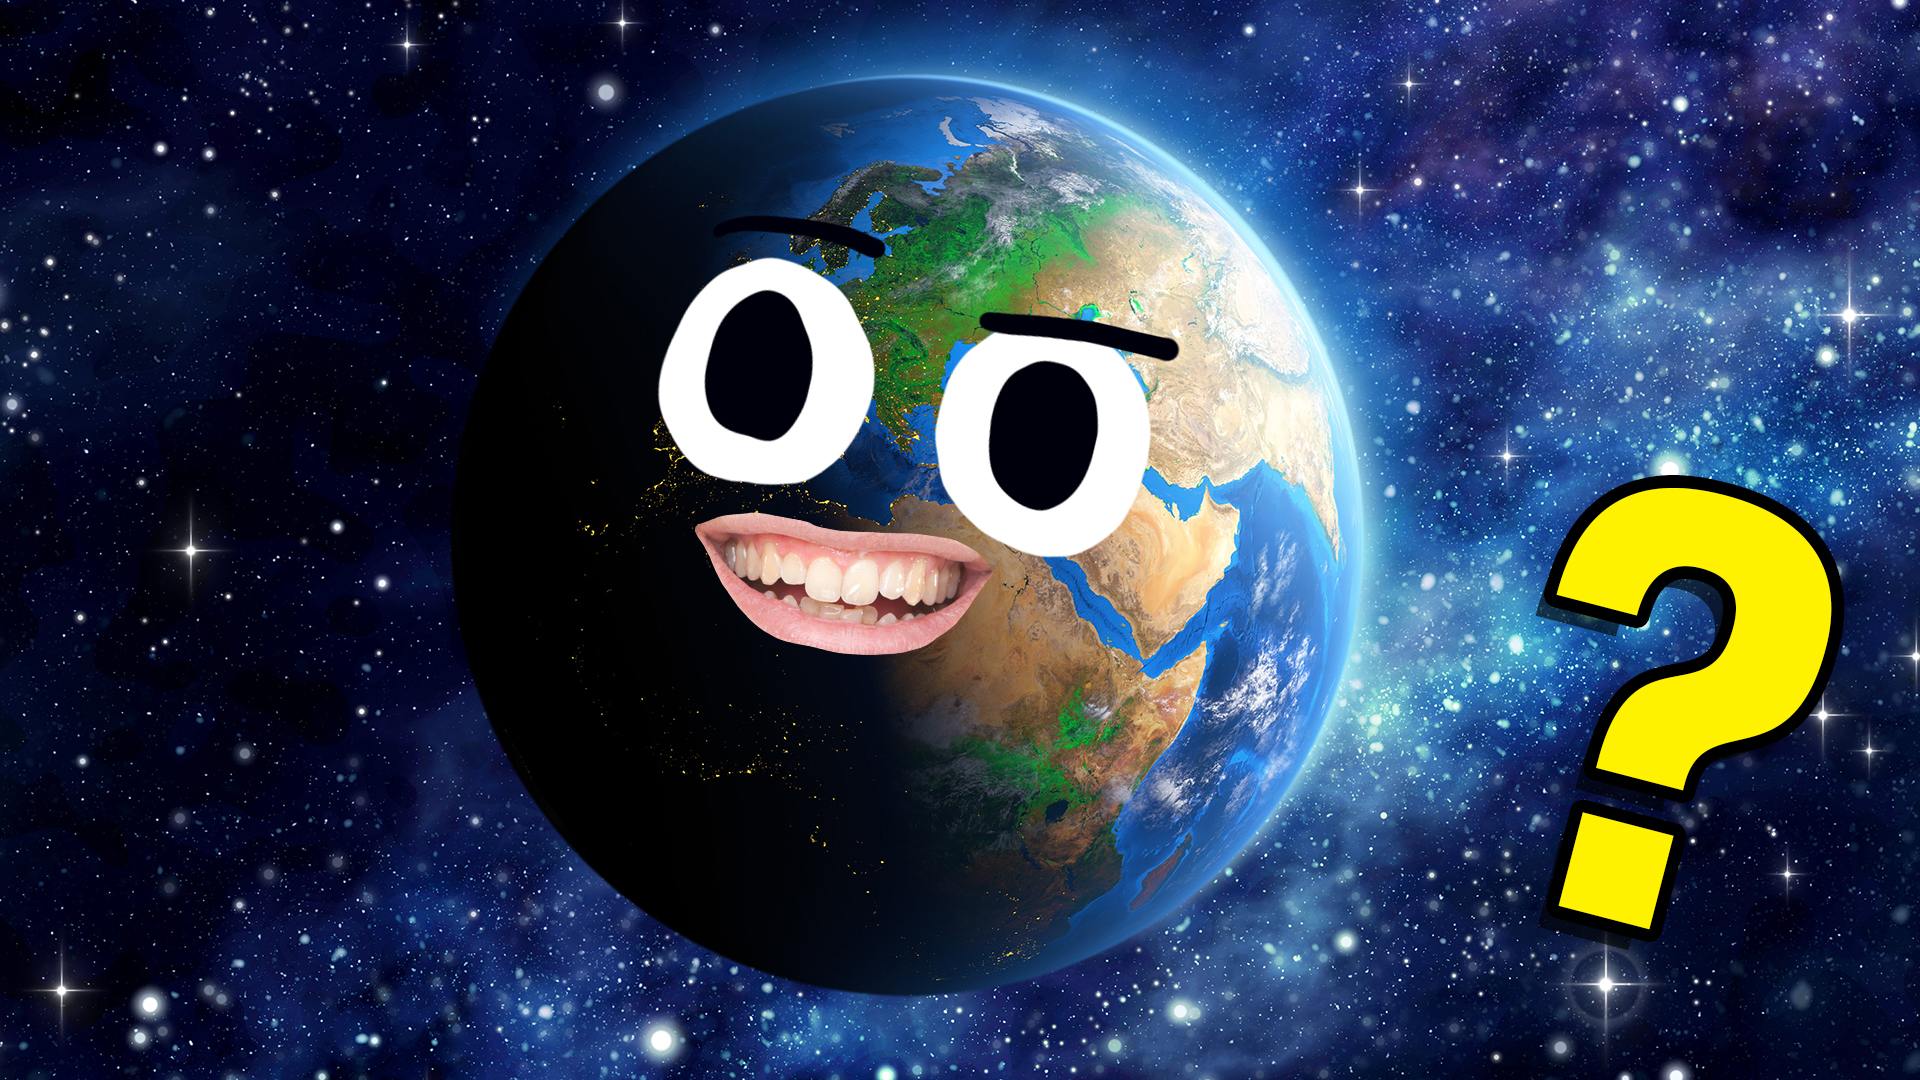 A smiling planet Earth